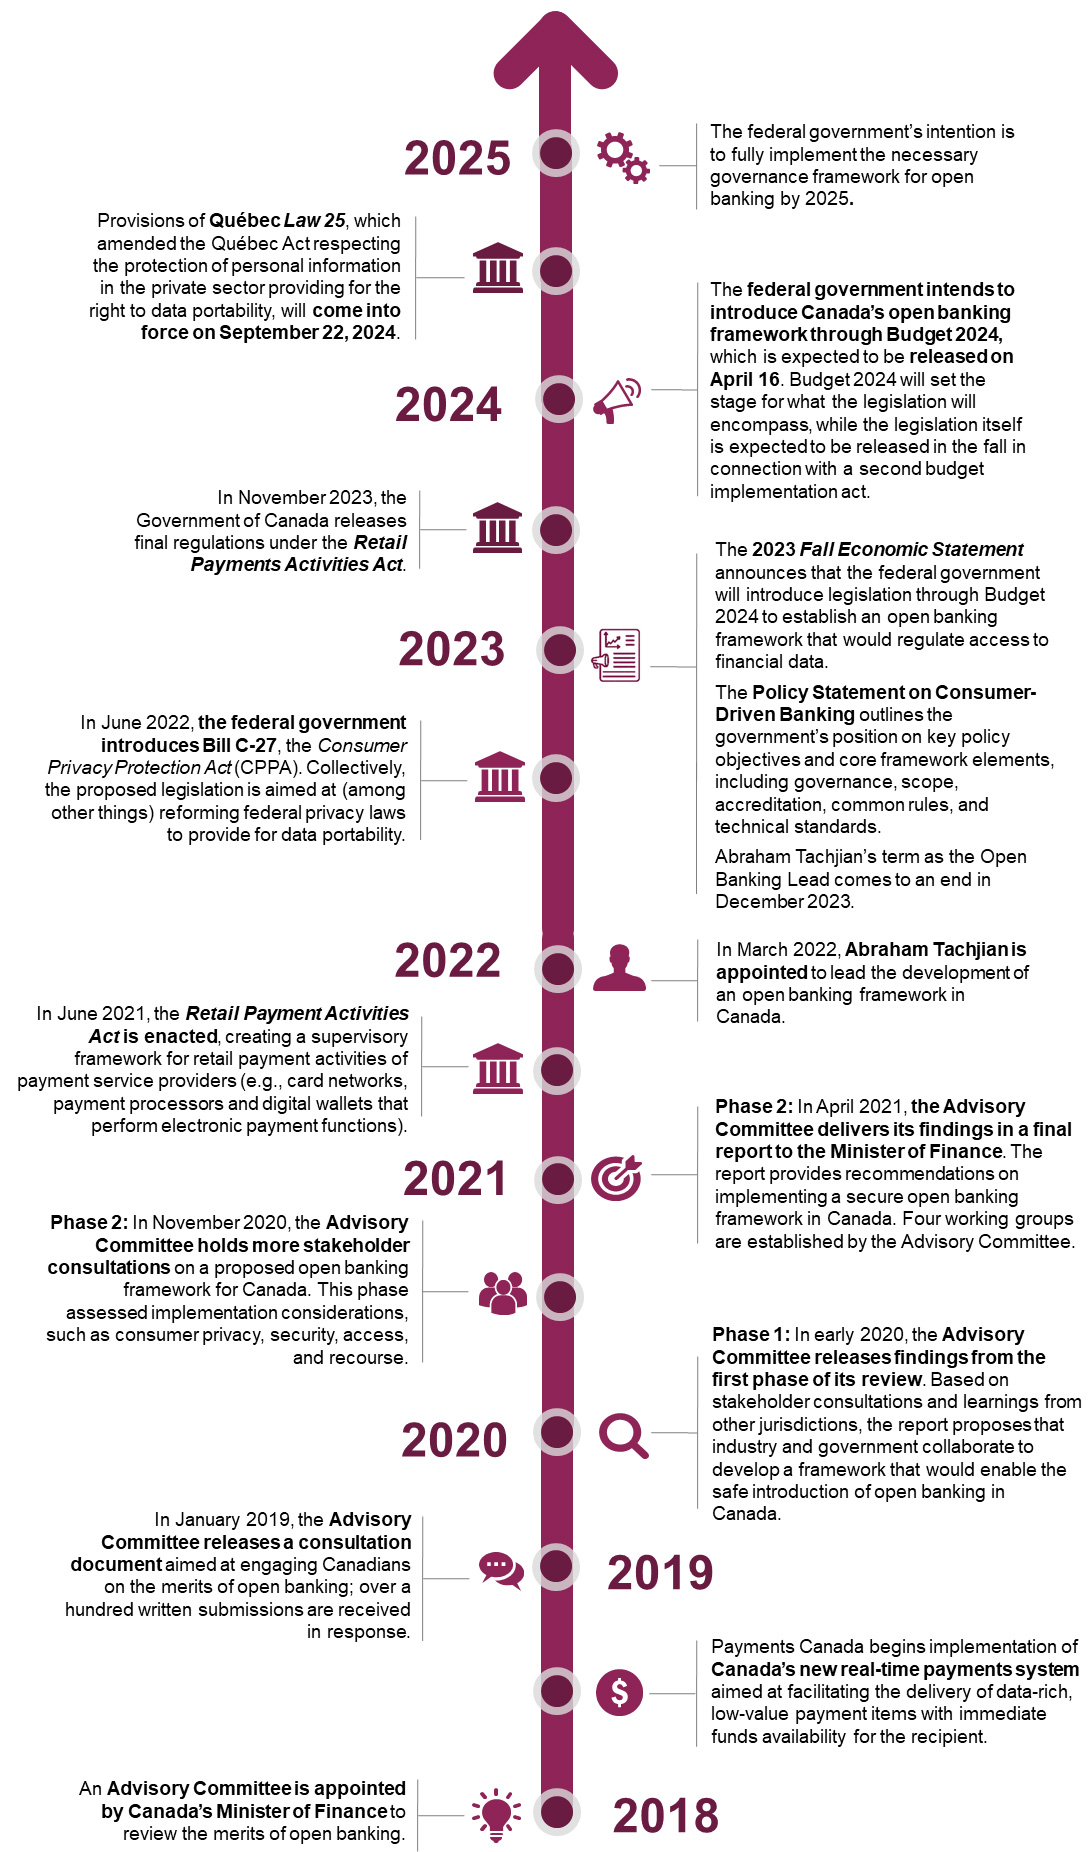 infographic of the open banking timeline in Canada from 2018 to 2025